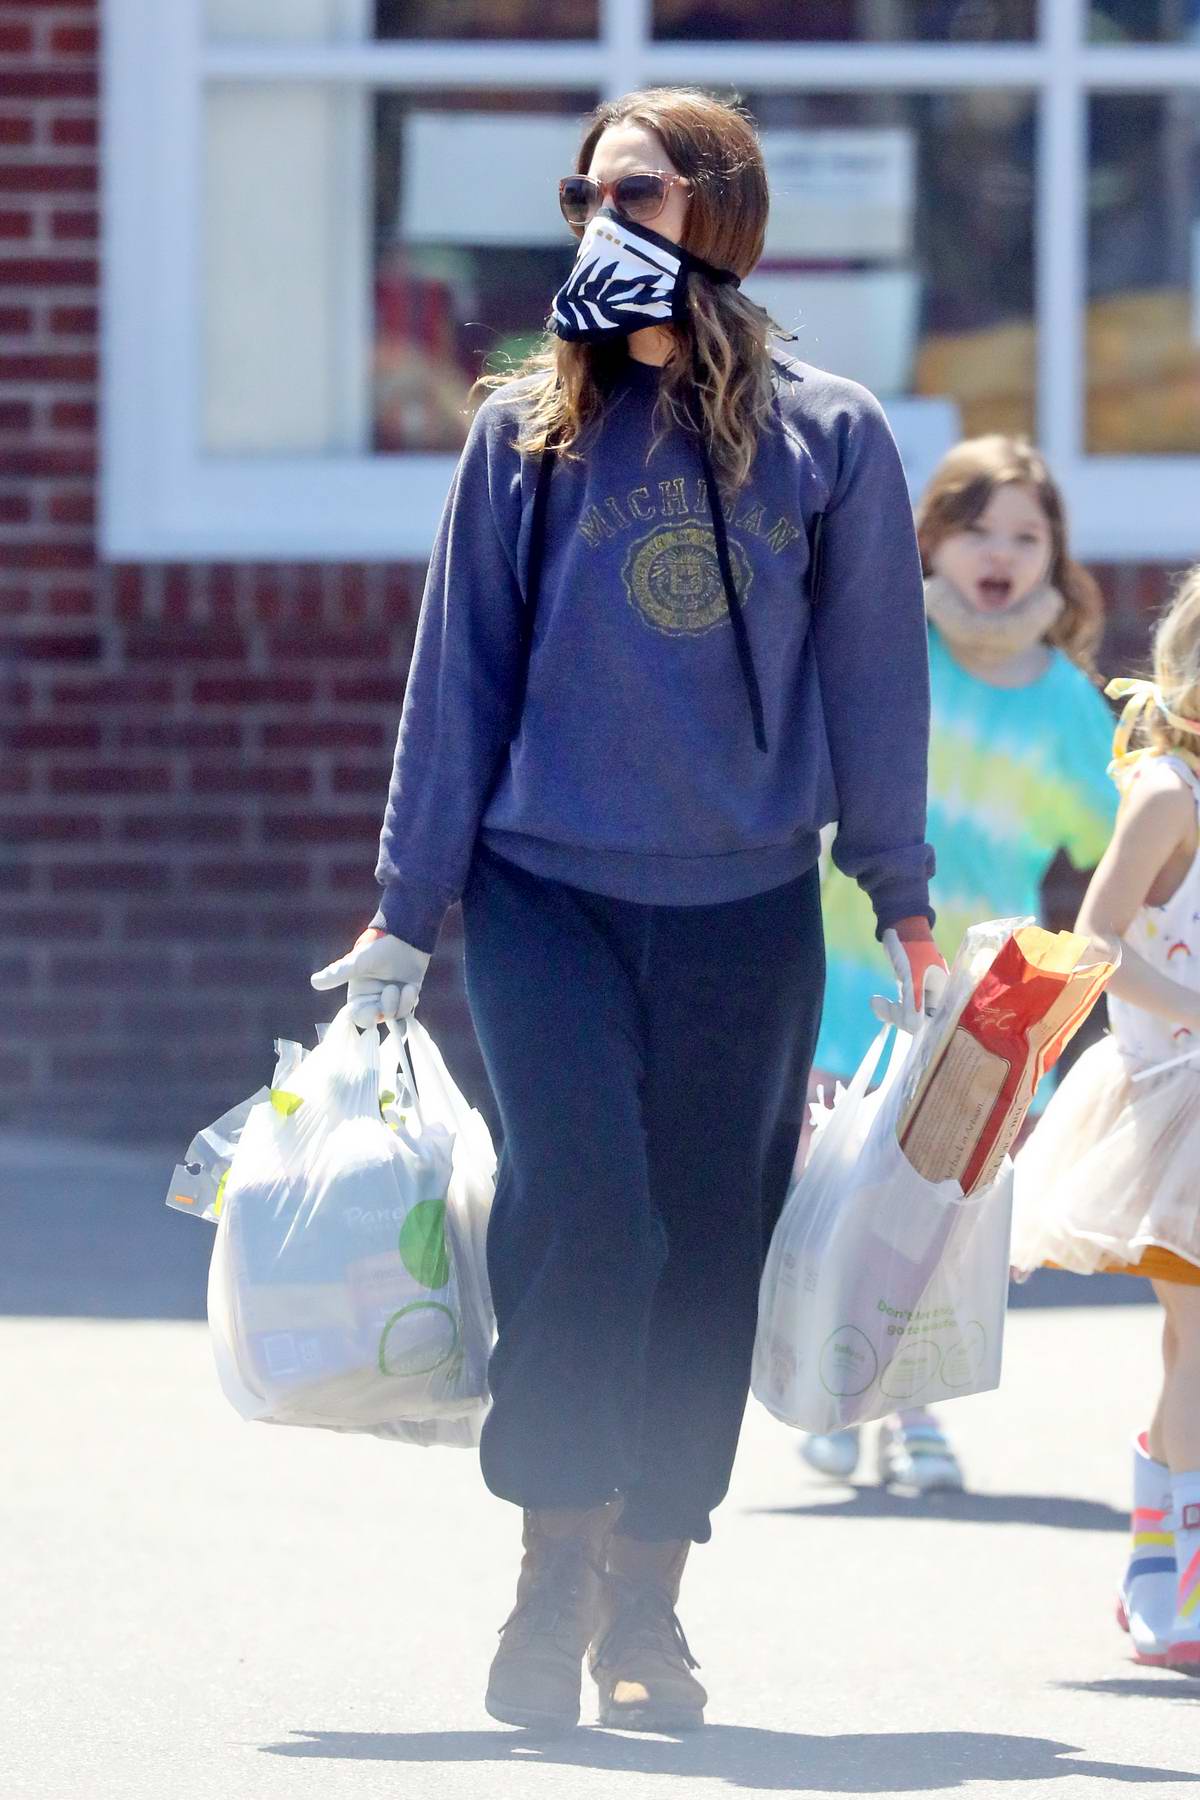 Kendall Jenner dresses comfy and casual for lunch with friends at